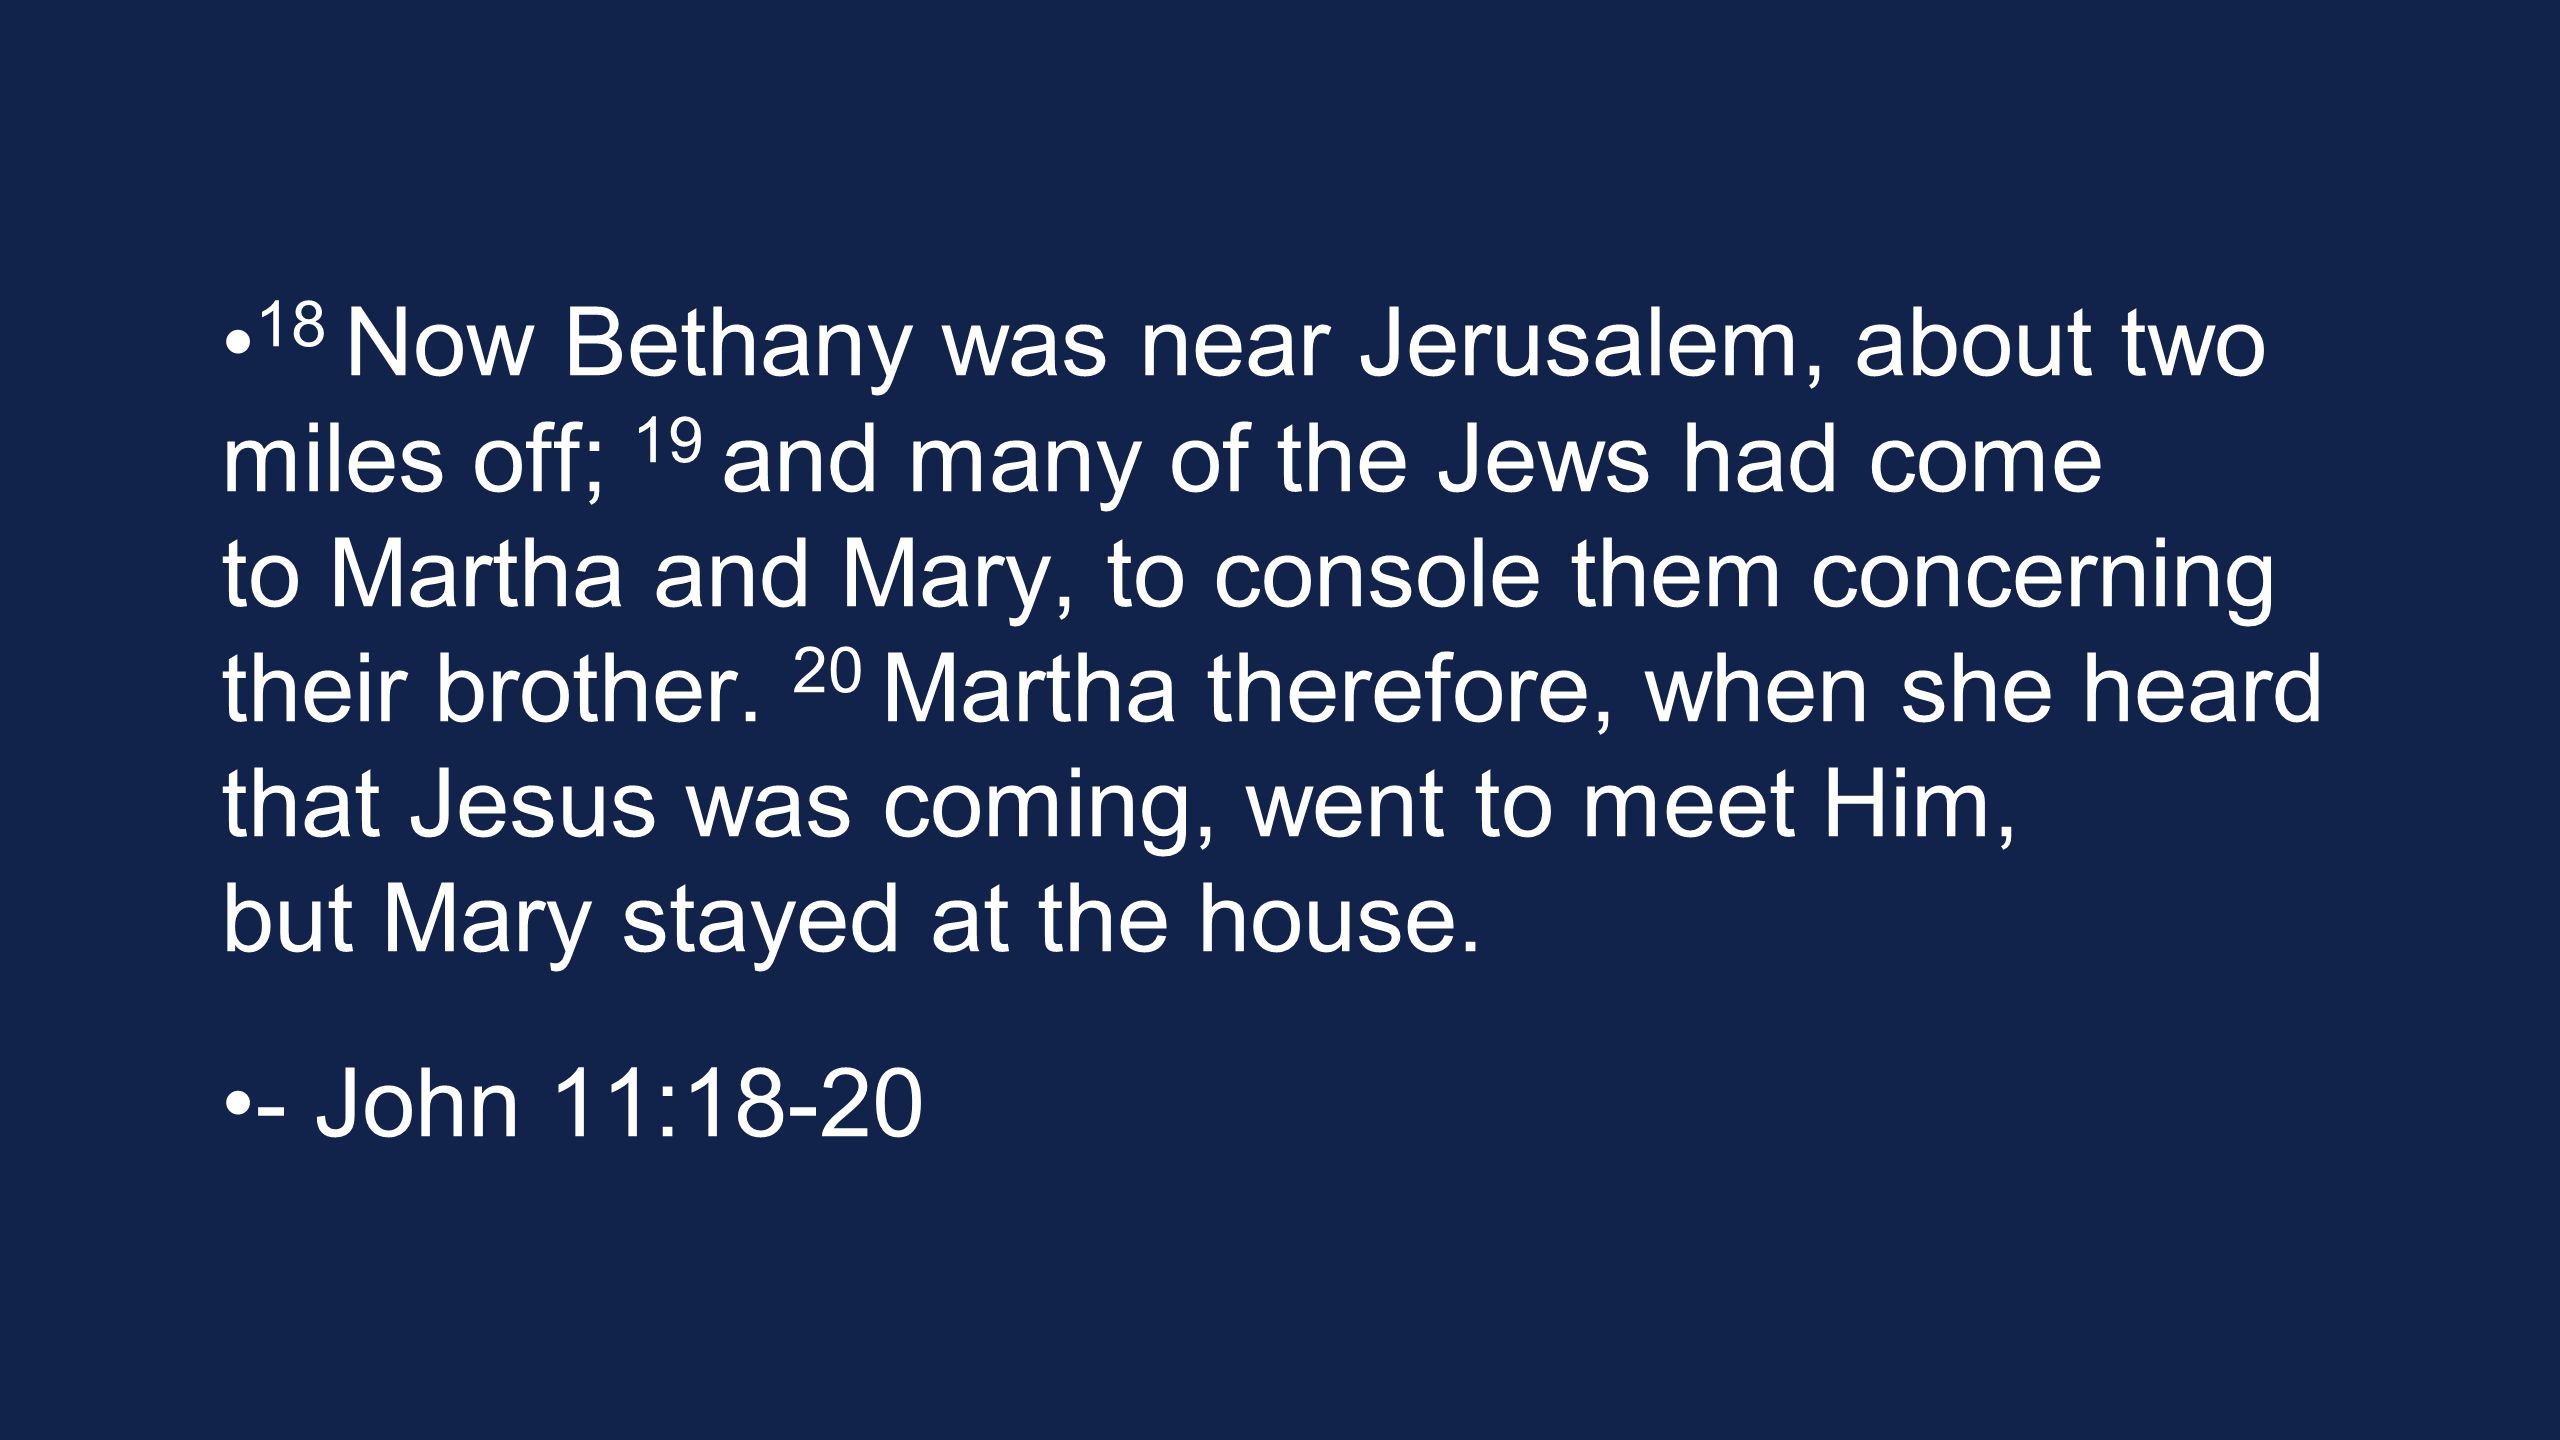 18 Now Bethany was near Jerusalem, about two miles off; 19 and many of the Jews had come to Martha and Mary, to console them concerning their brother.